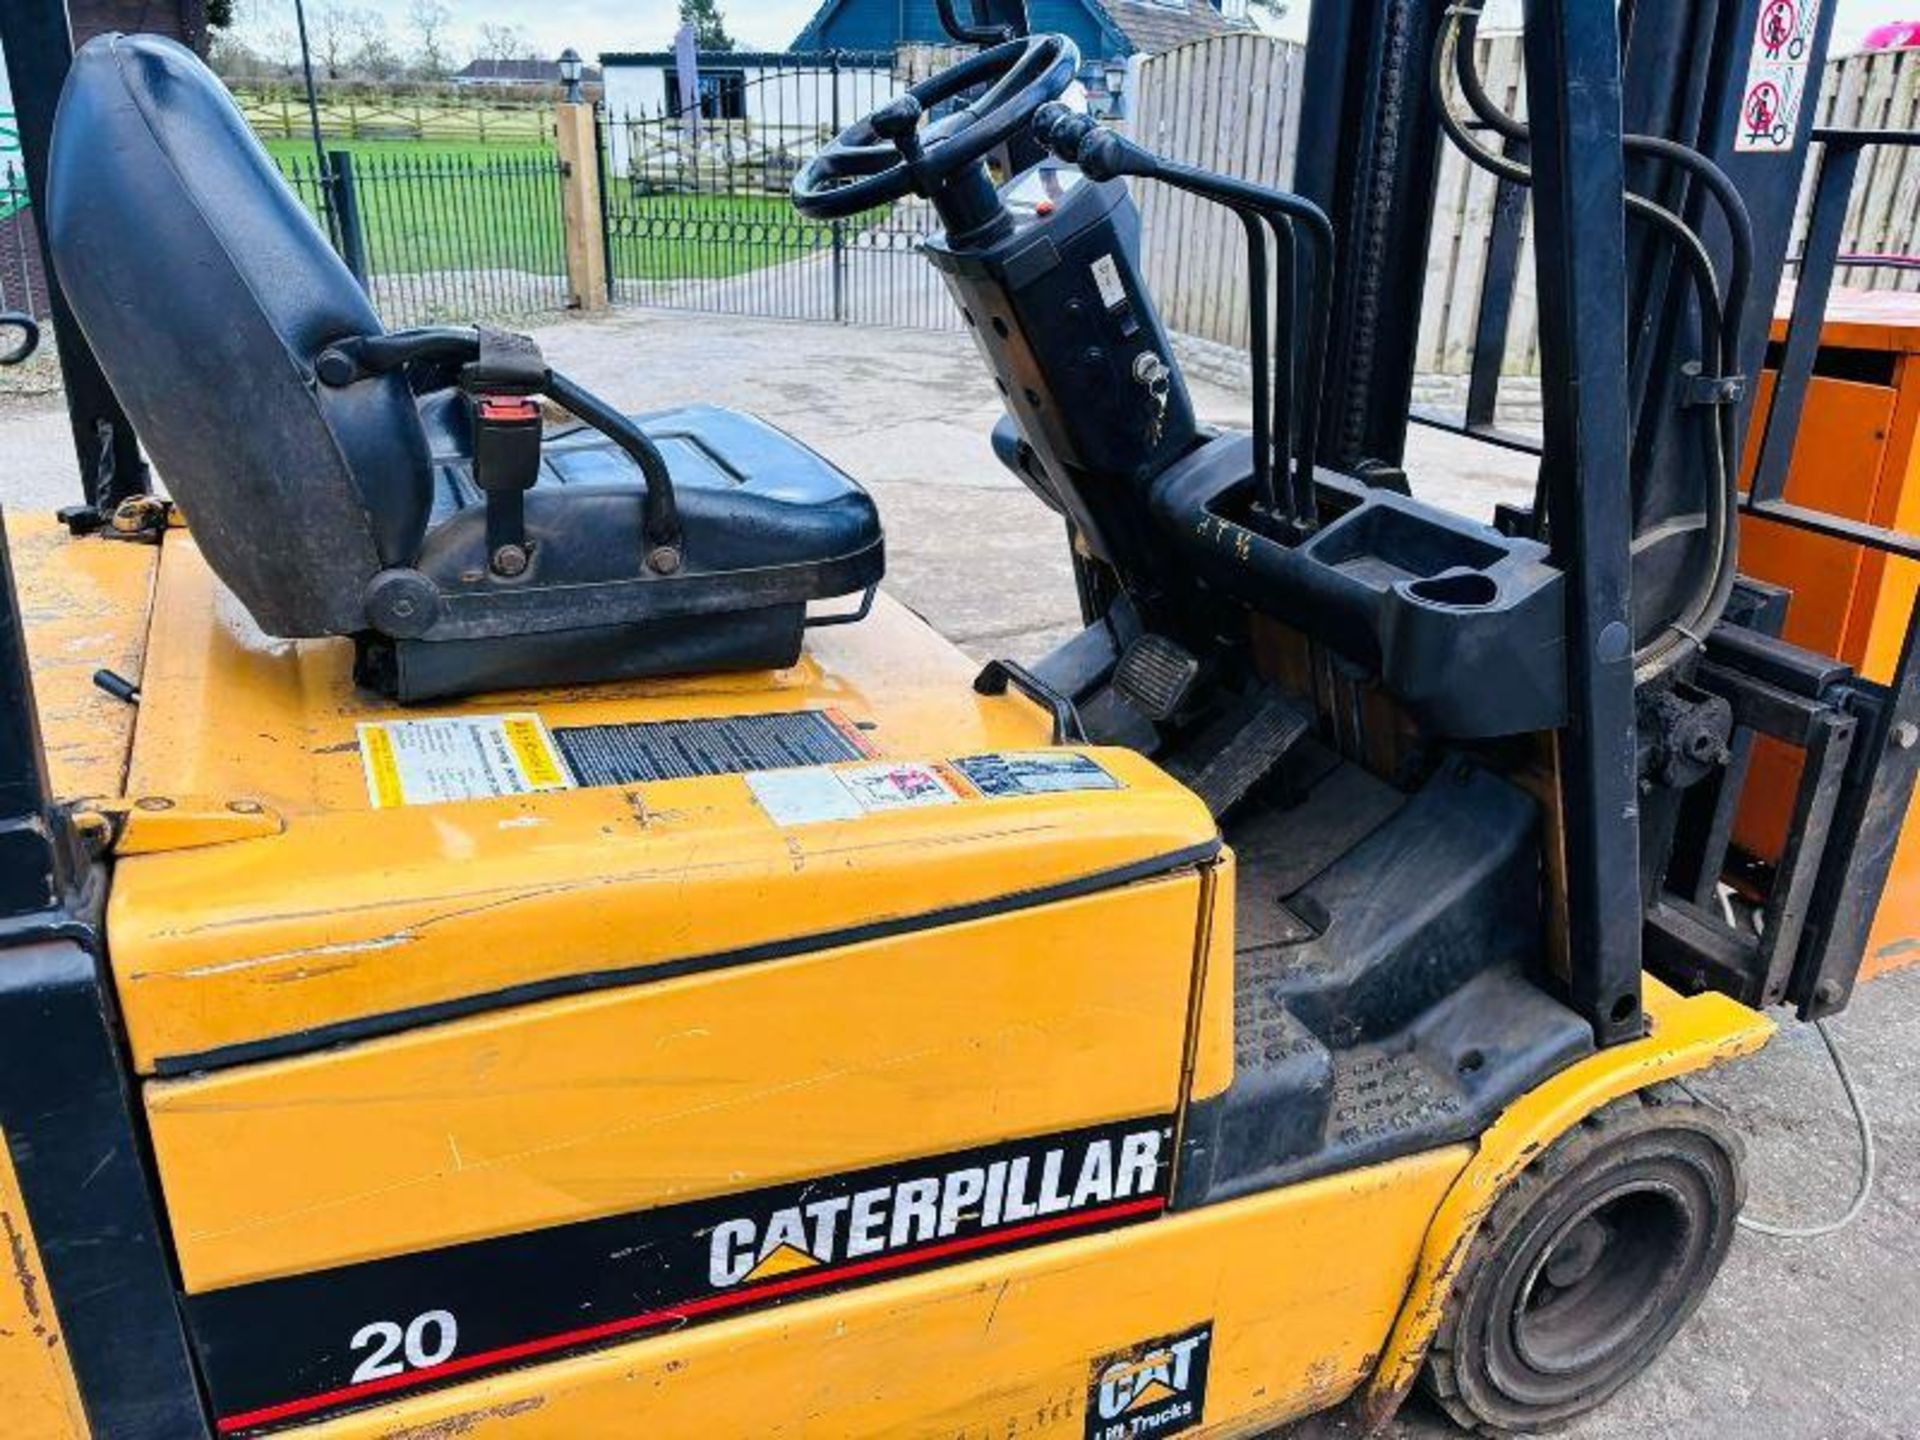 CATERPILLAR 20 BATTERY FORKLIFT C/W BATTERY CHARGER - Image 6 of 17